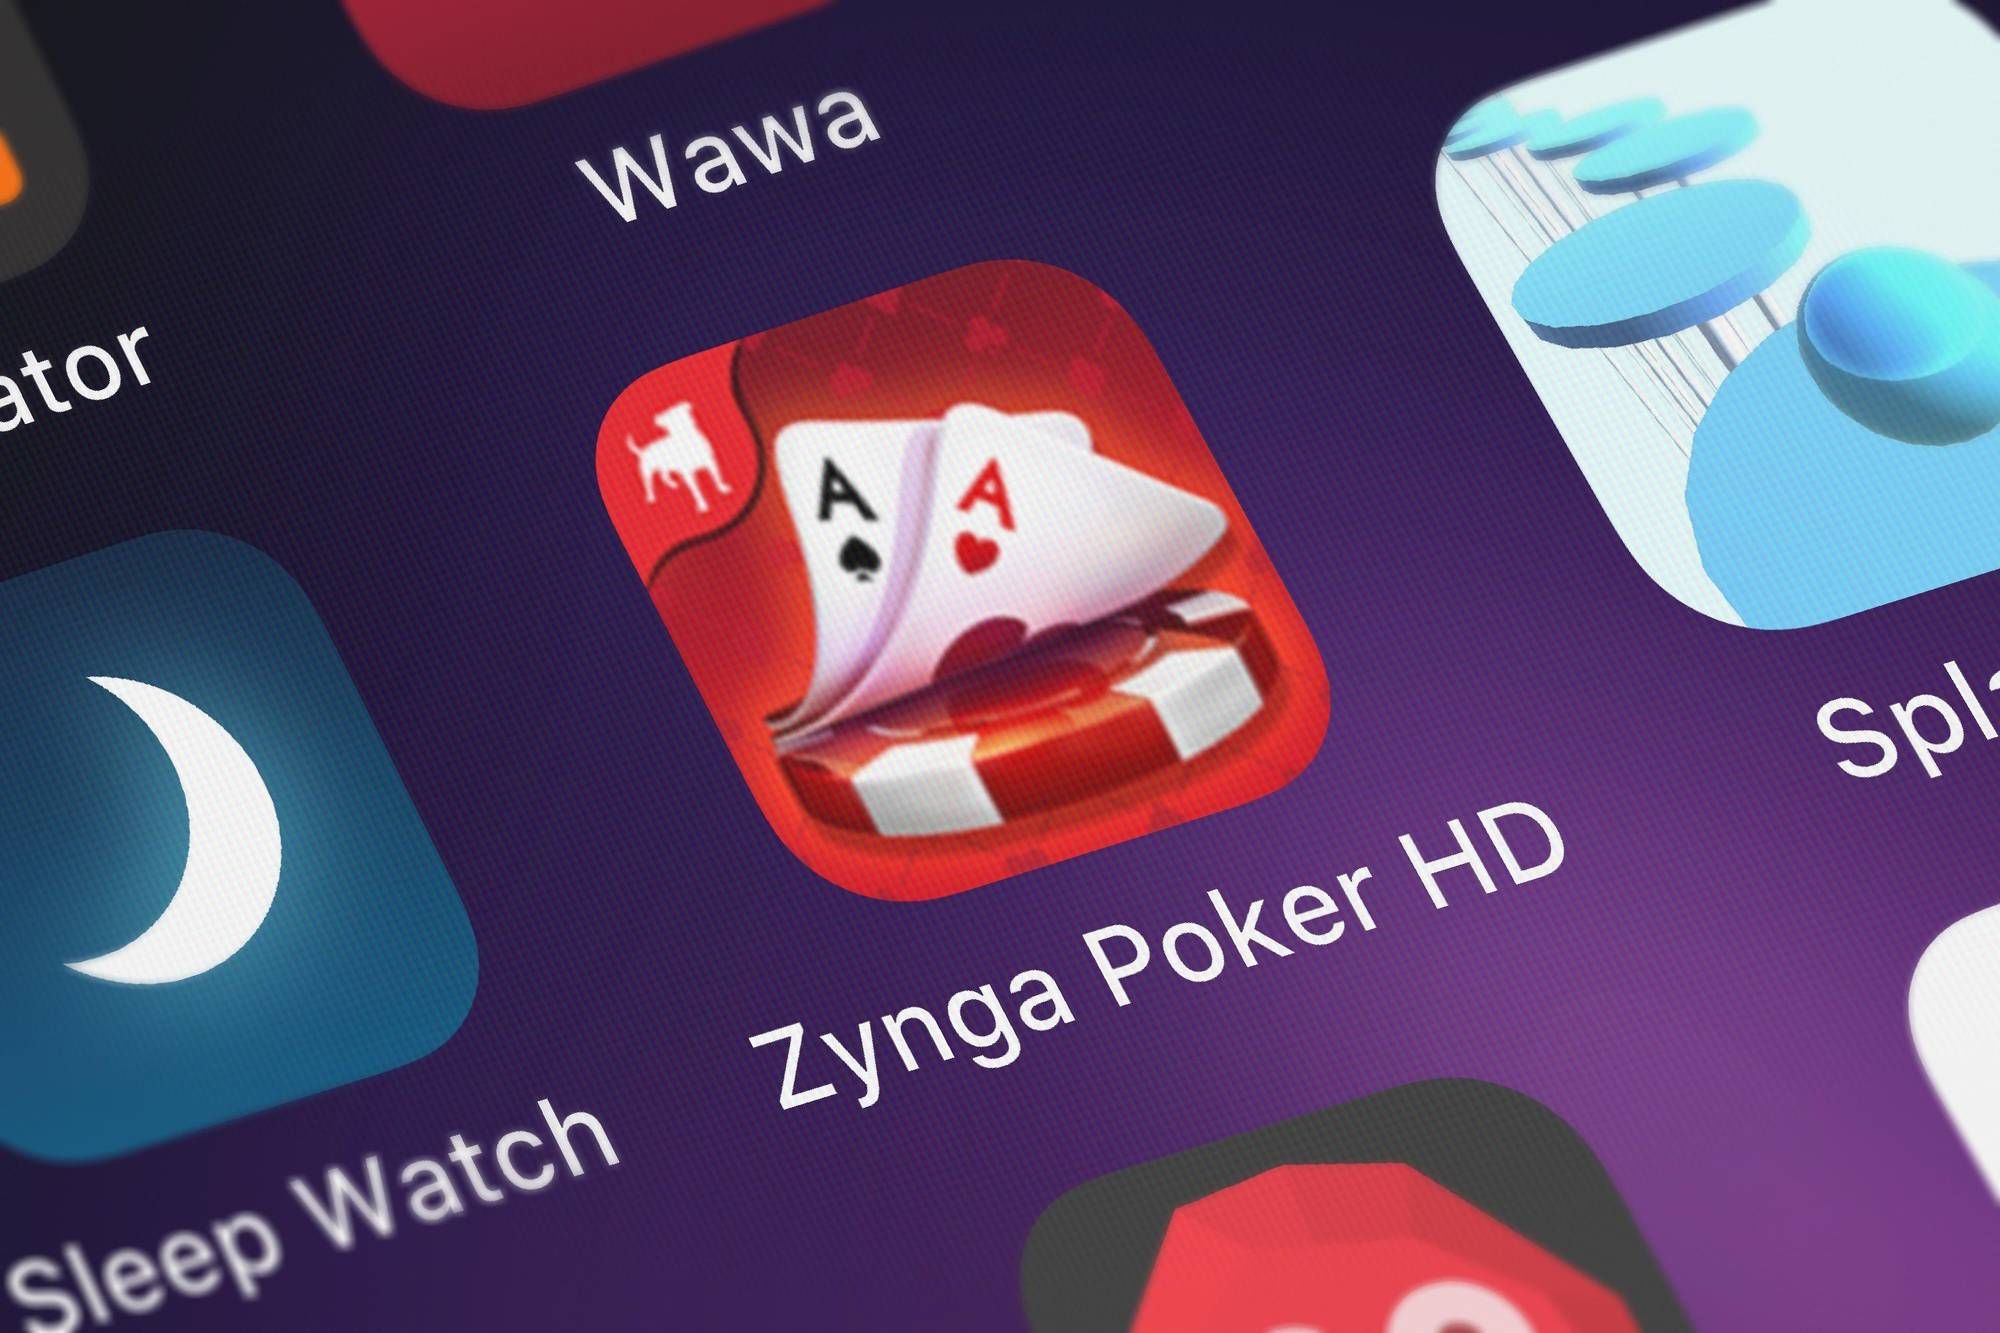 Apple class action lawsuit over mobile apps such as Zynga.